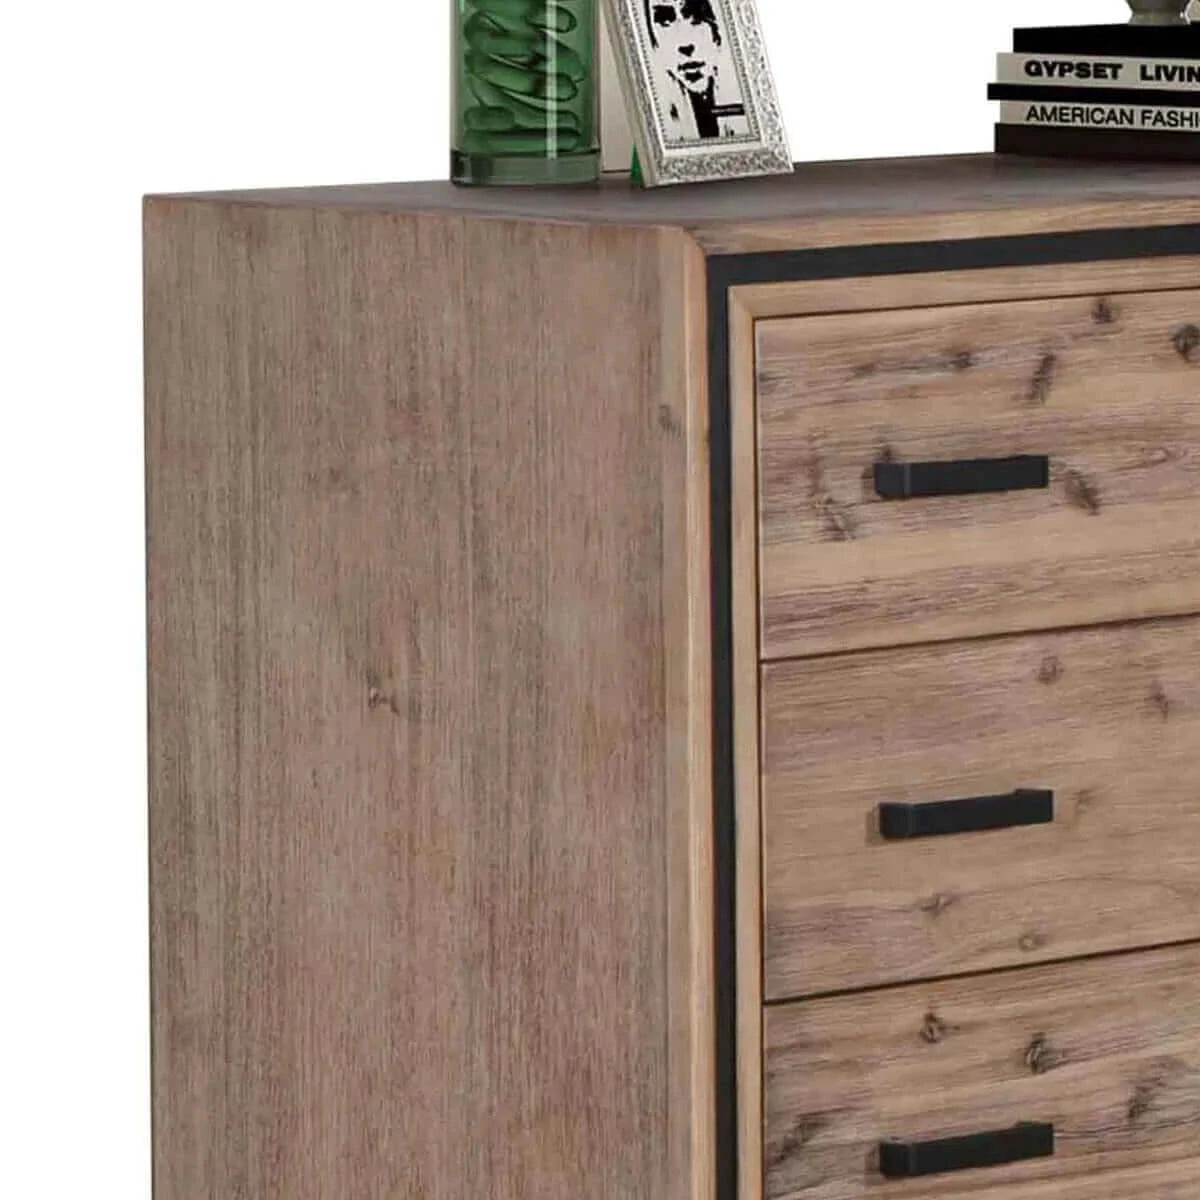 Buy tallboy with 5 storage drawers solid acacia wooden frame in silver brush colour - upinteriors-Upinteriors